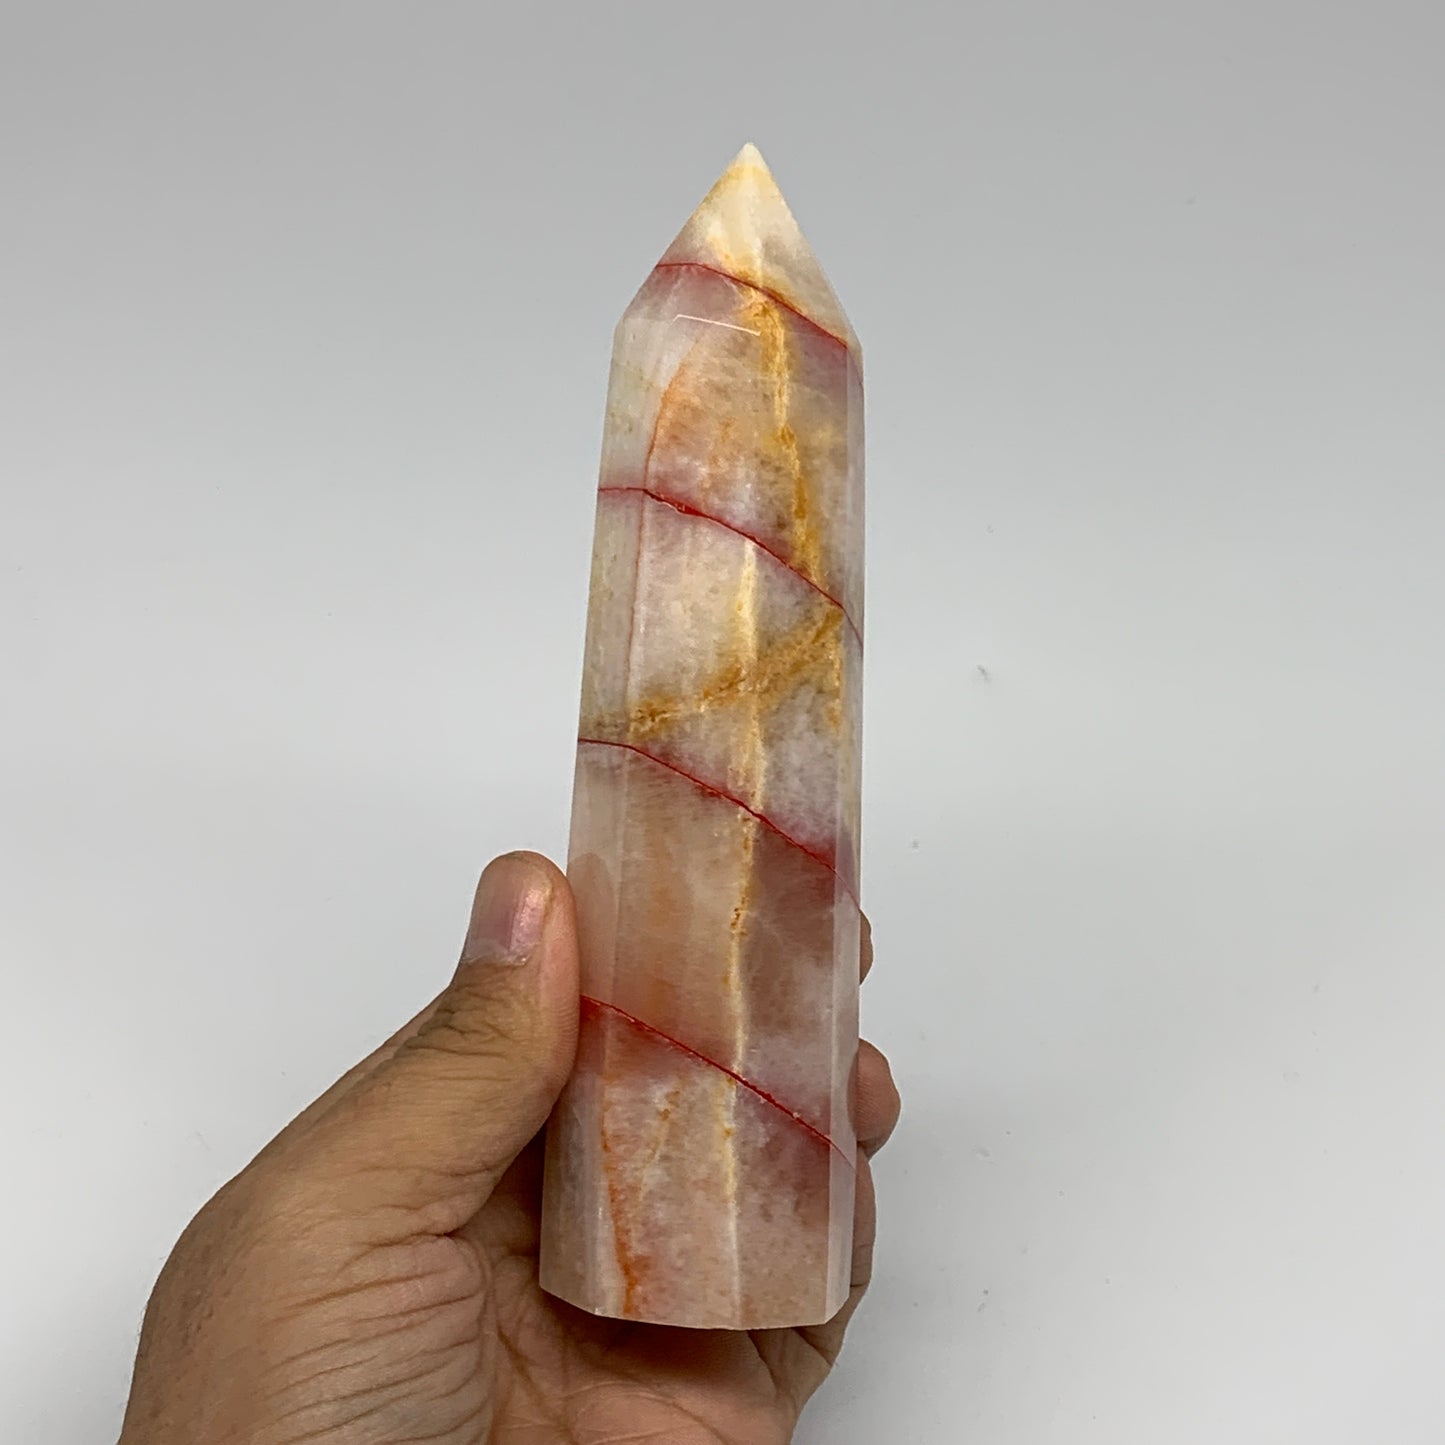 359.5g, 5.8"x1.6"x1.5" Dyed/Heated Calcite Point Tower Obelisk Crystal, B24980